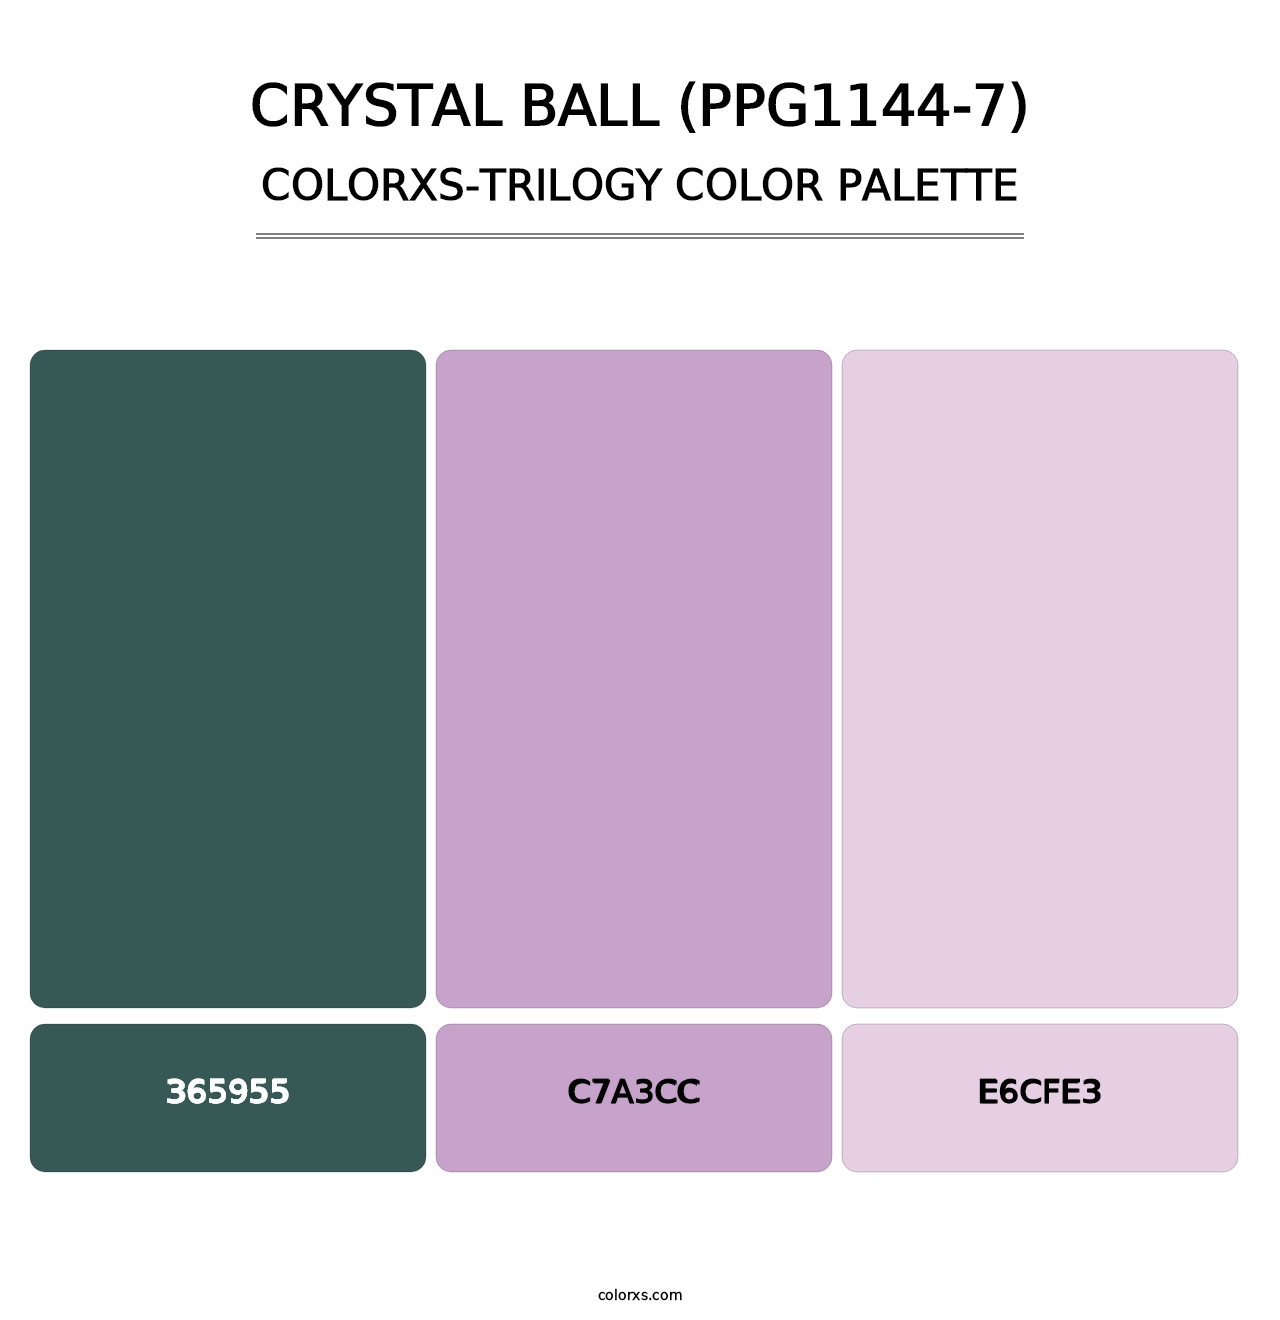 Crystal Ball (PPG1144-7) - Colorxs Trilogy Palette